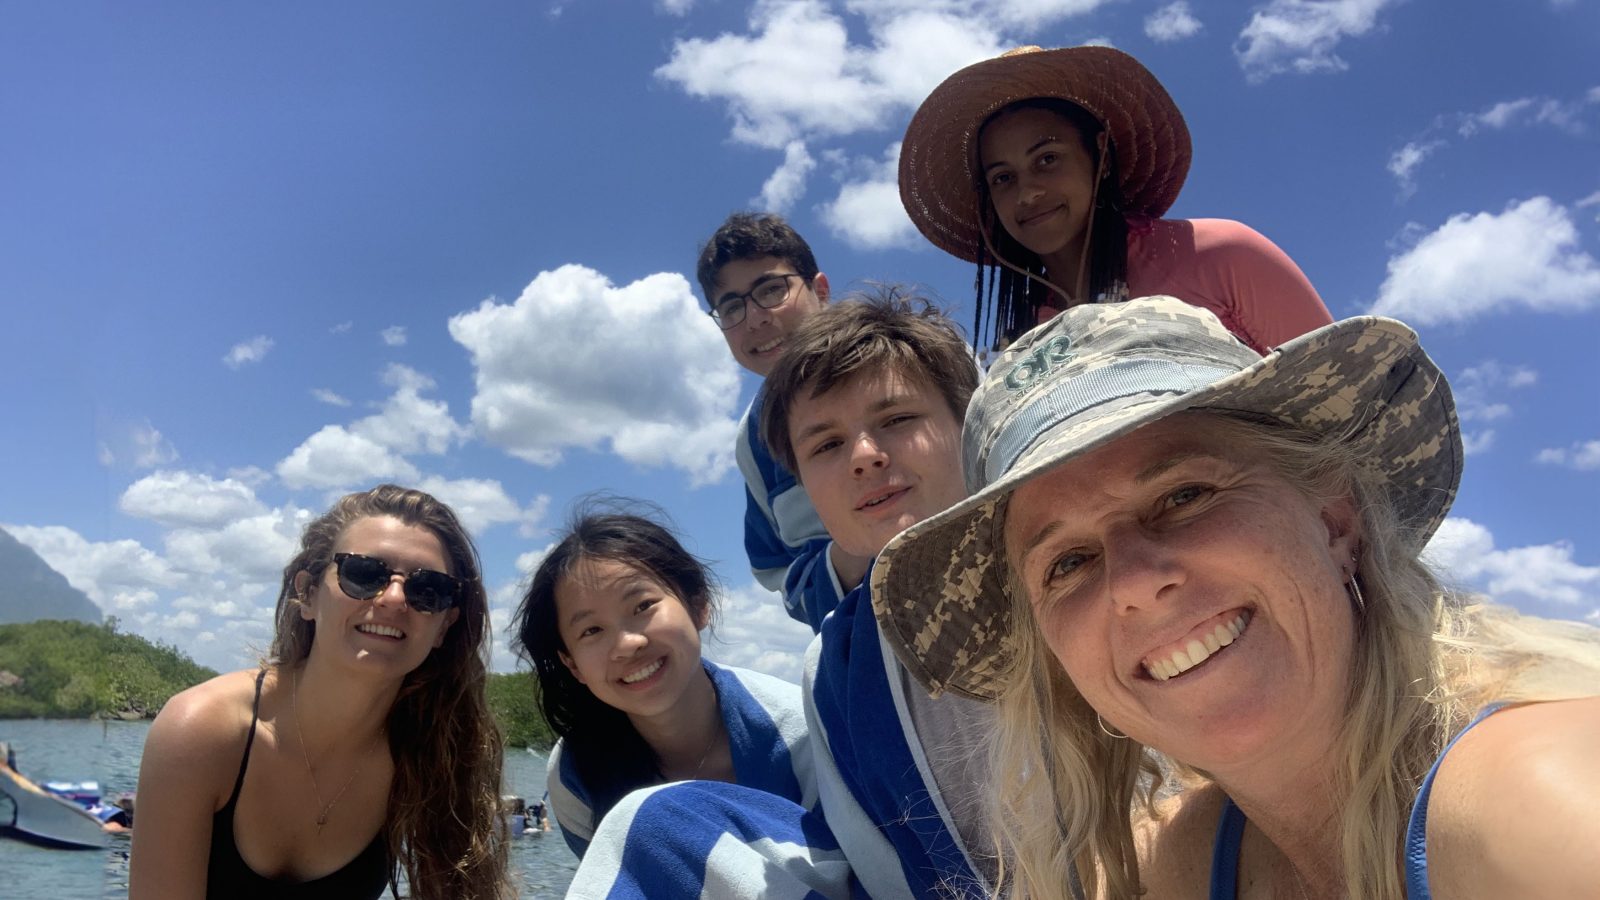 A group of students and a faculty member pose for a selfie with a beach and blue sky in the background.